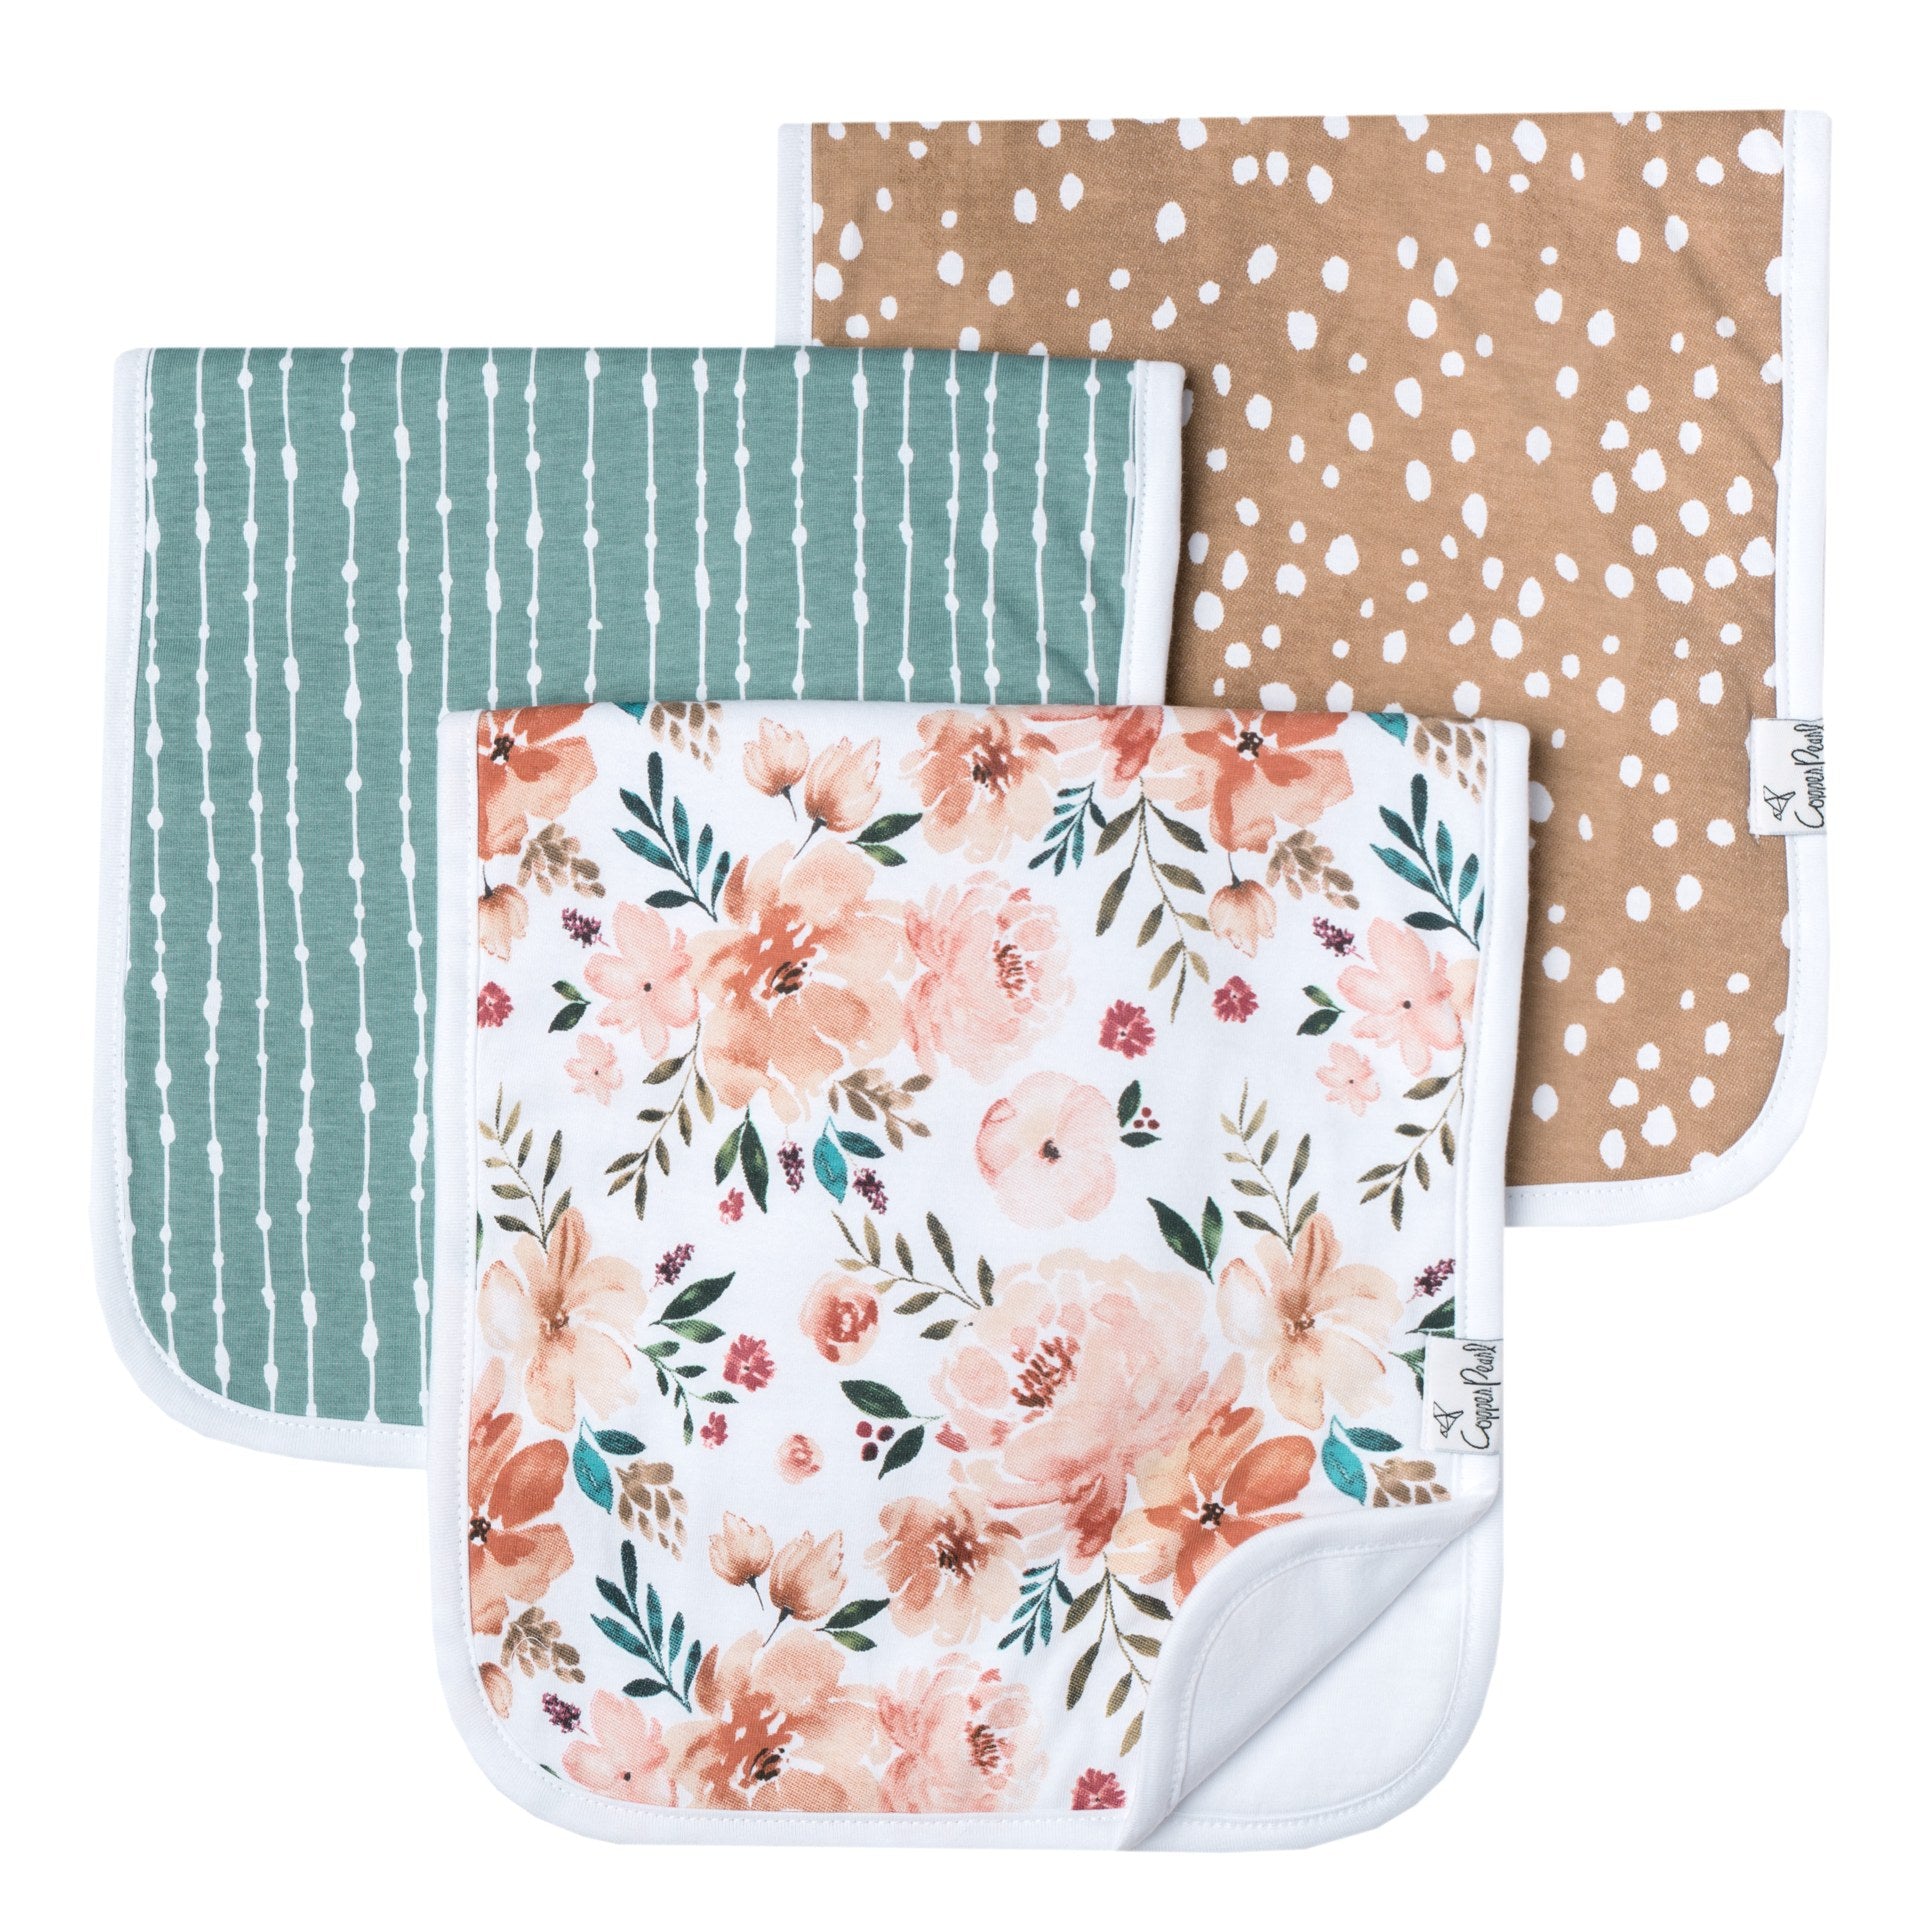 3 styles of burp cloths included in the set (blue white stripes, brown white dots, floral)